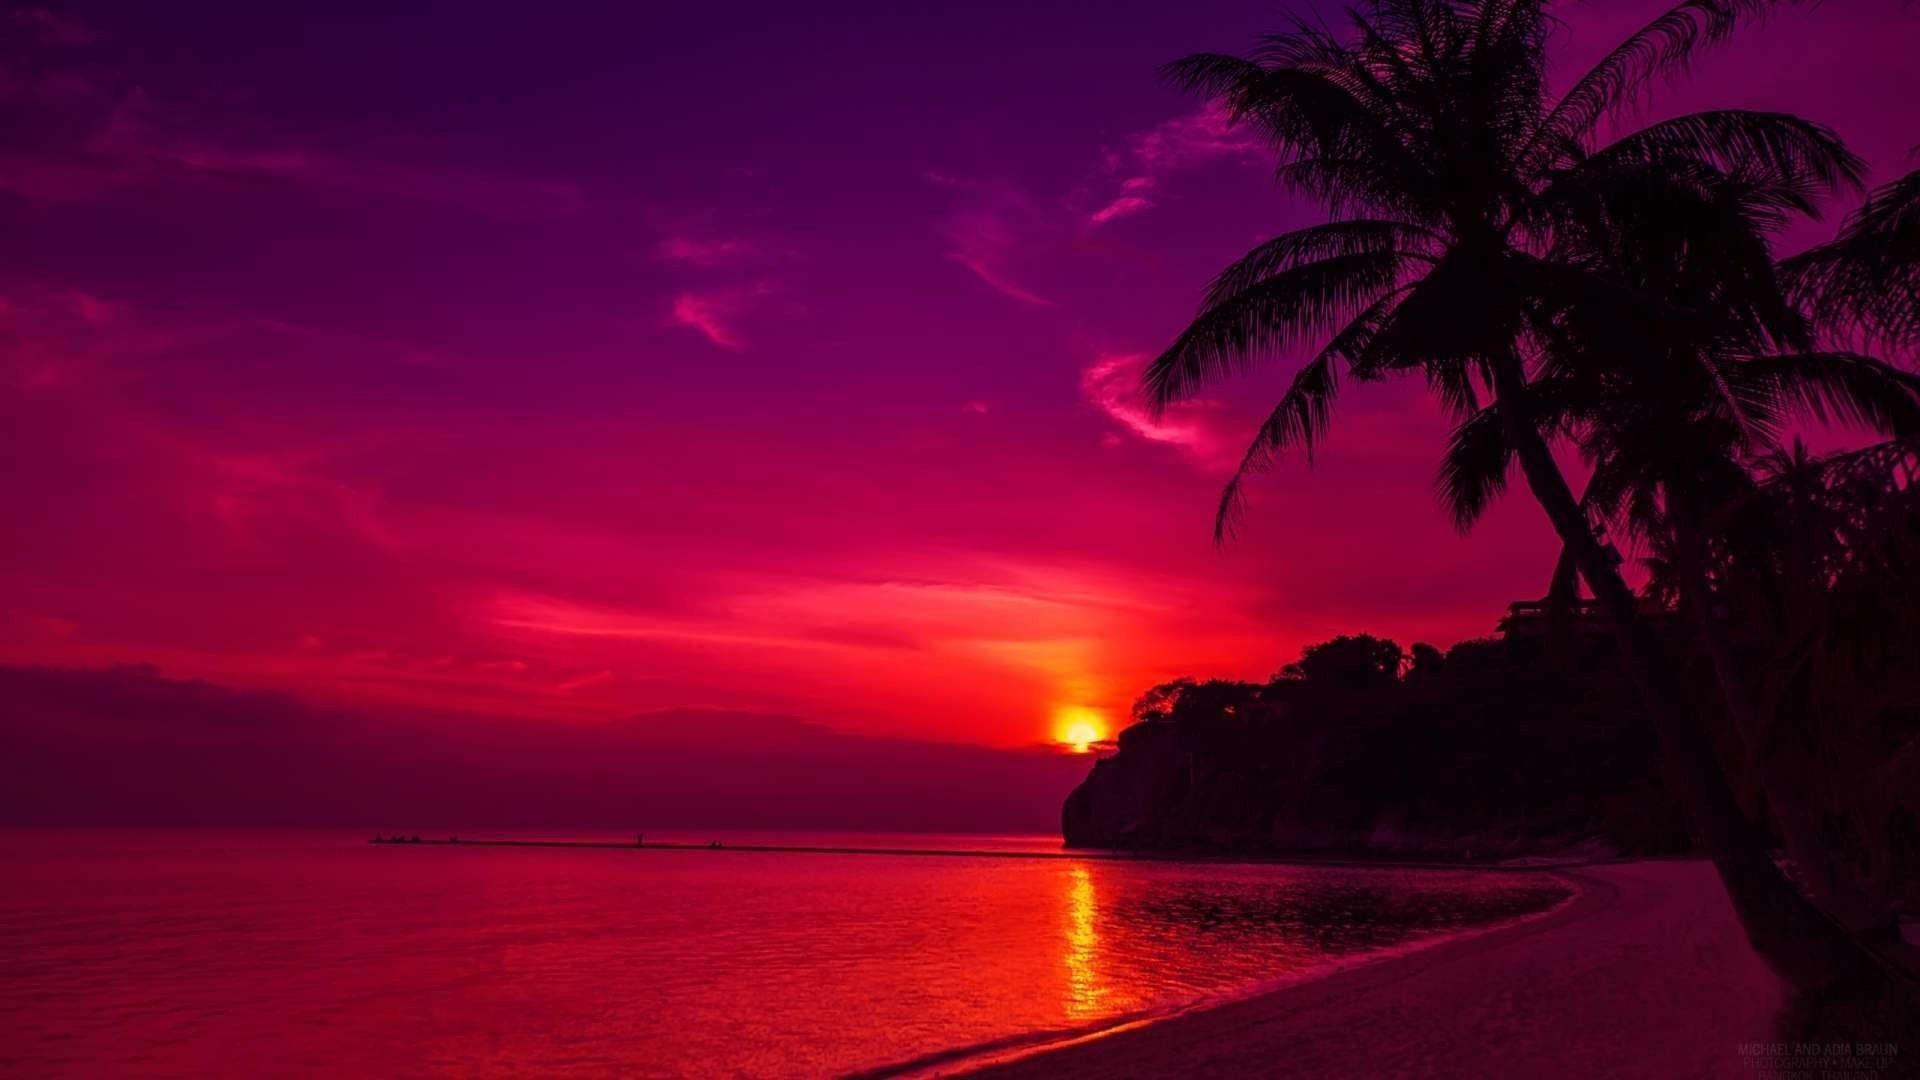 By the Beach in Hawaii Sunset Wallpaper